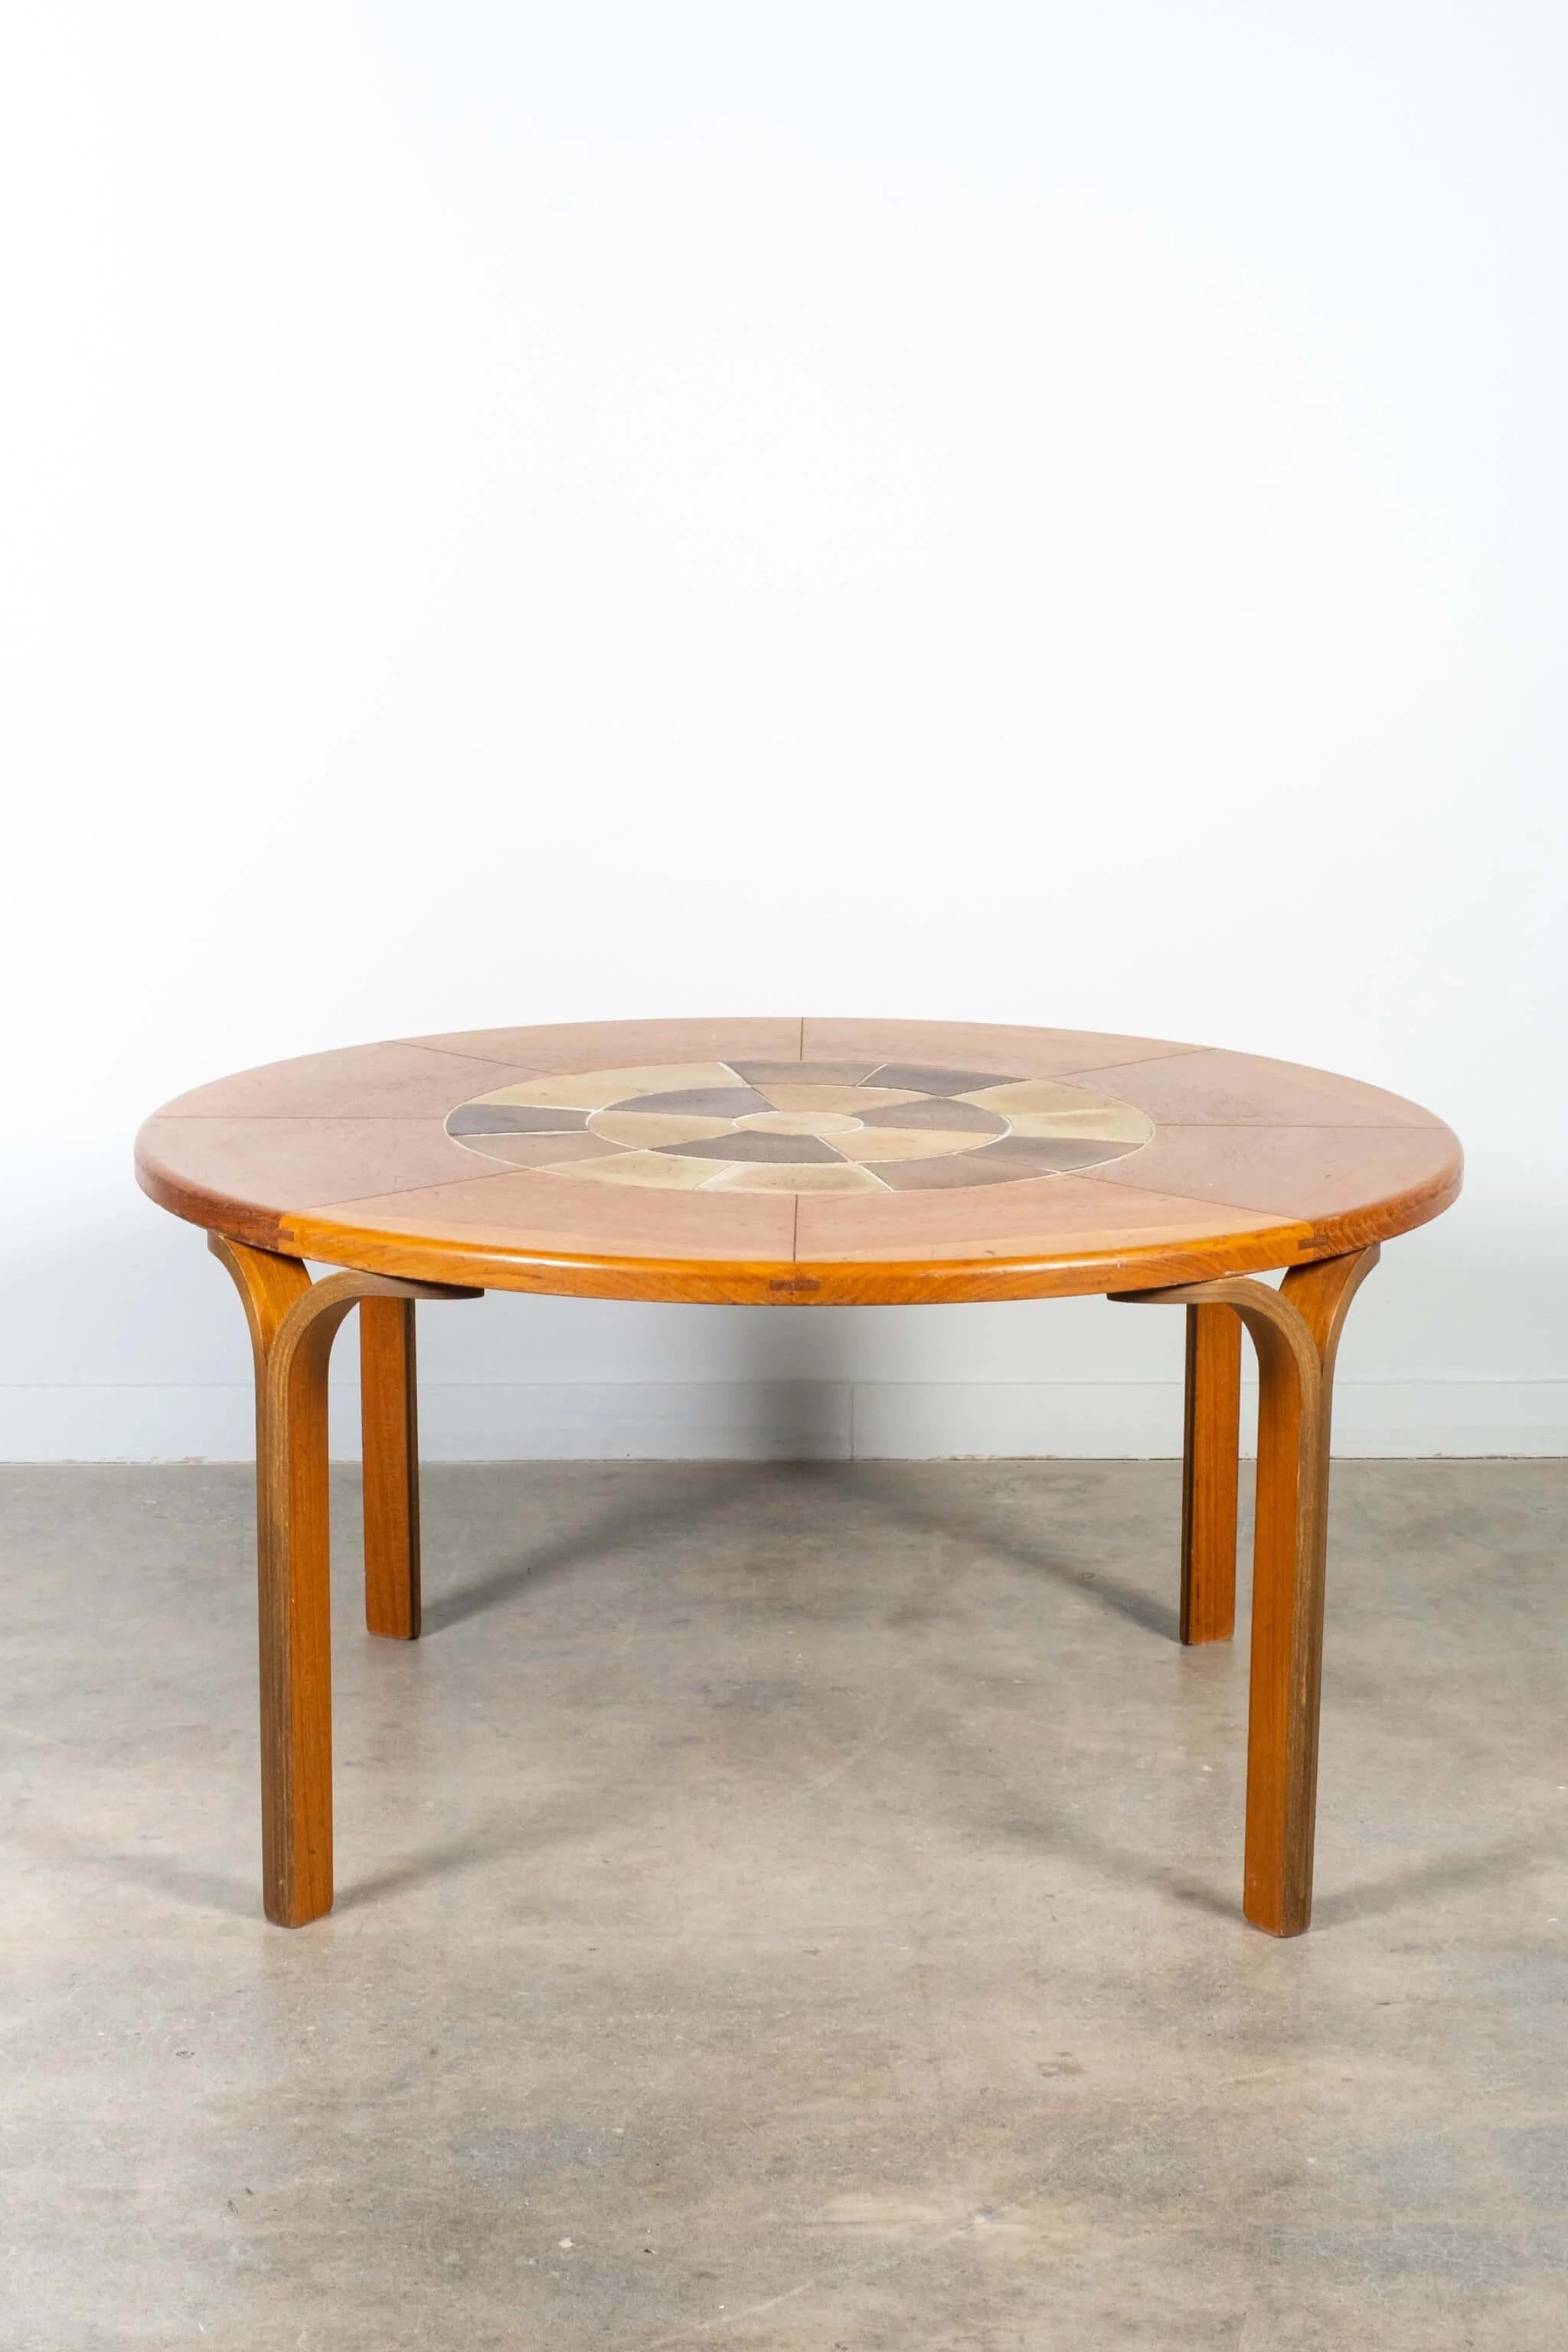 Post-Modern Haslev Mobelsnedkeri Round Tiled-Top Dining Table by Tue Poulsen For Sale